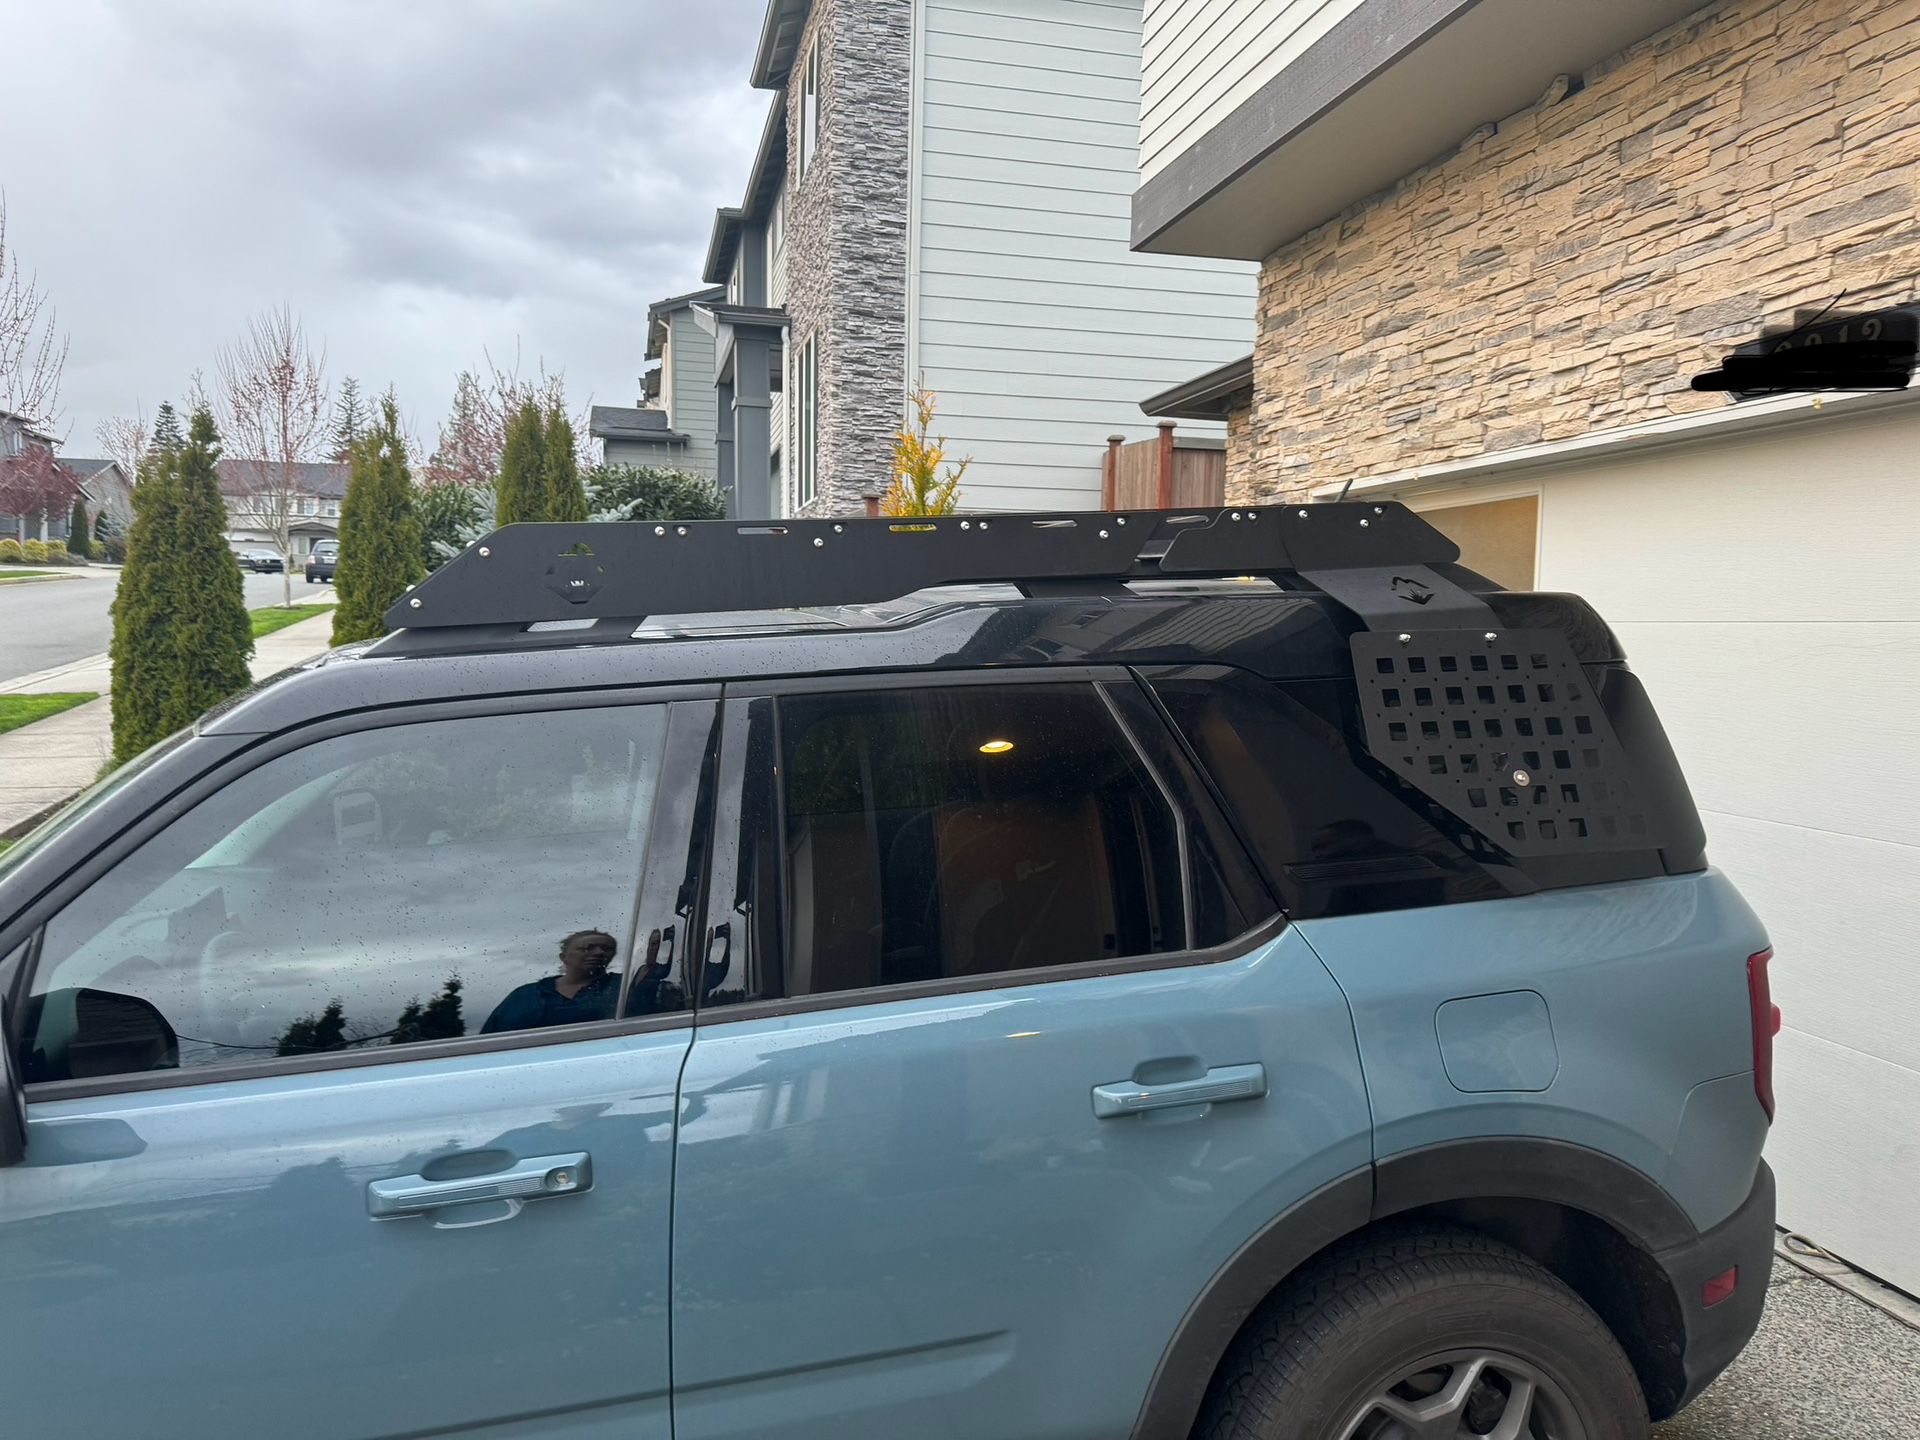 Yuca Ford Bronco Sport Roof Rack 2.0 with Zombie Guard for mounting accessories